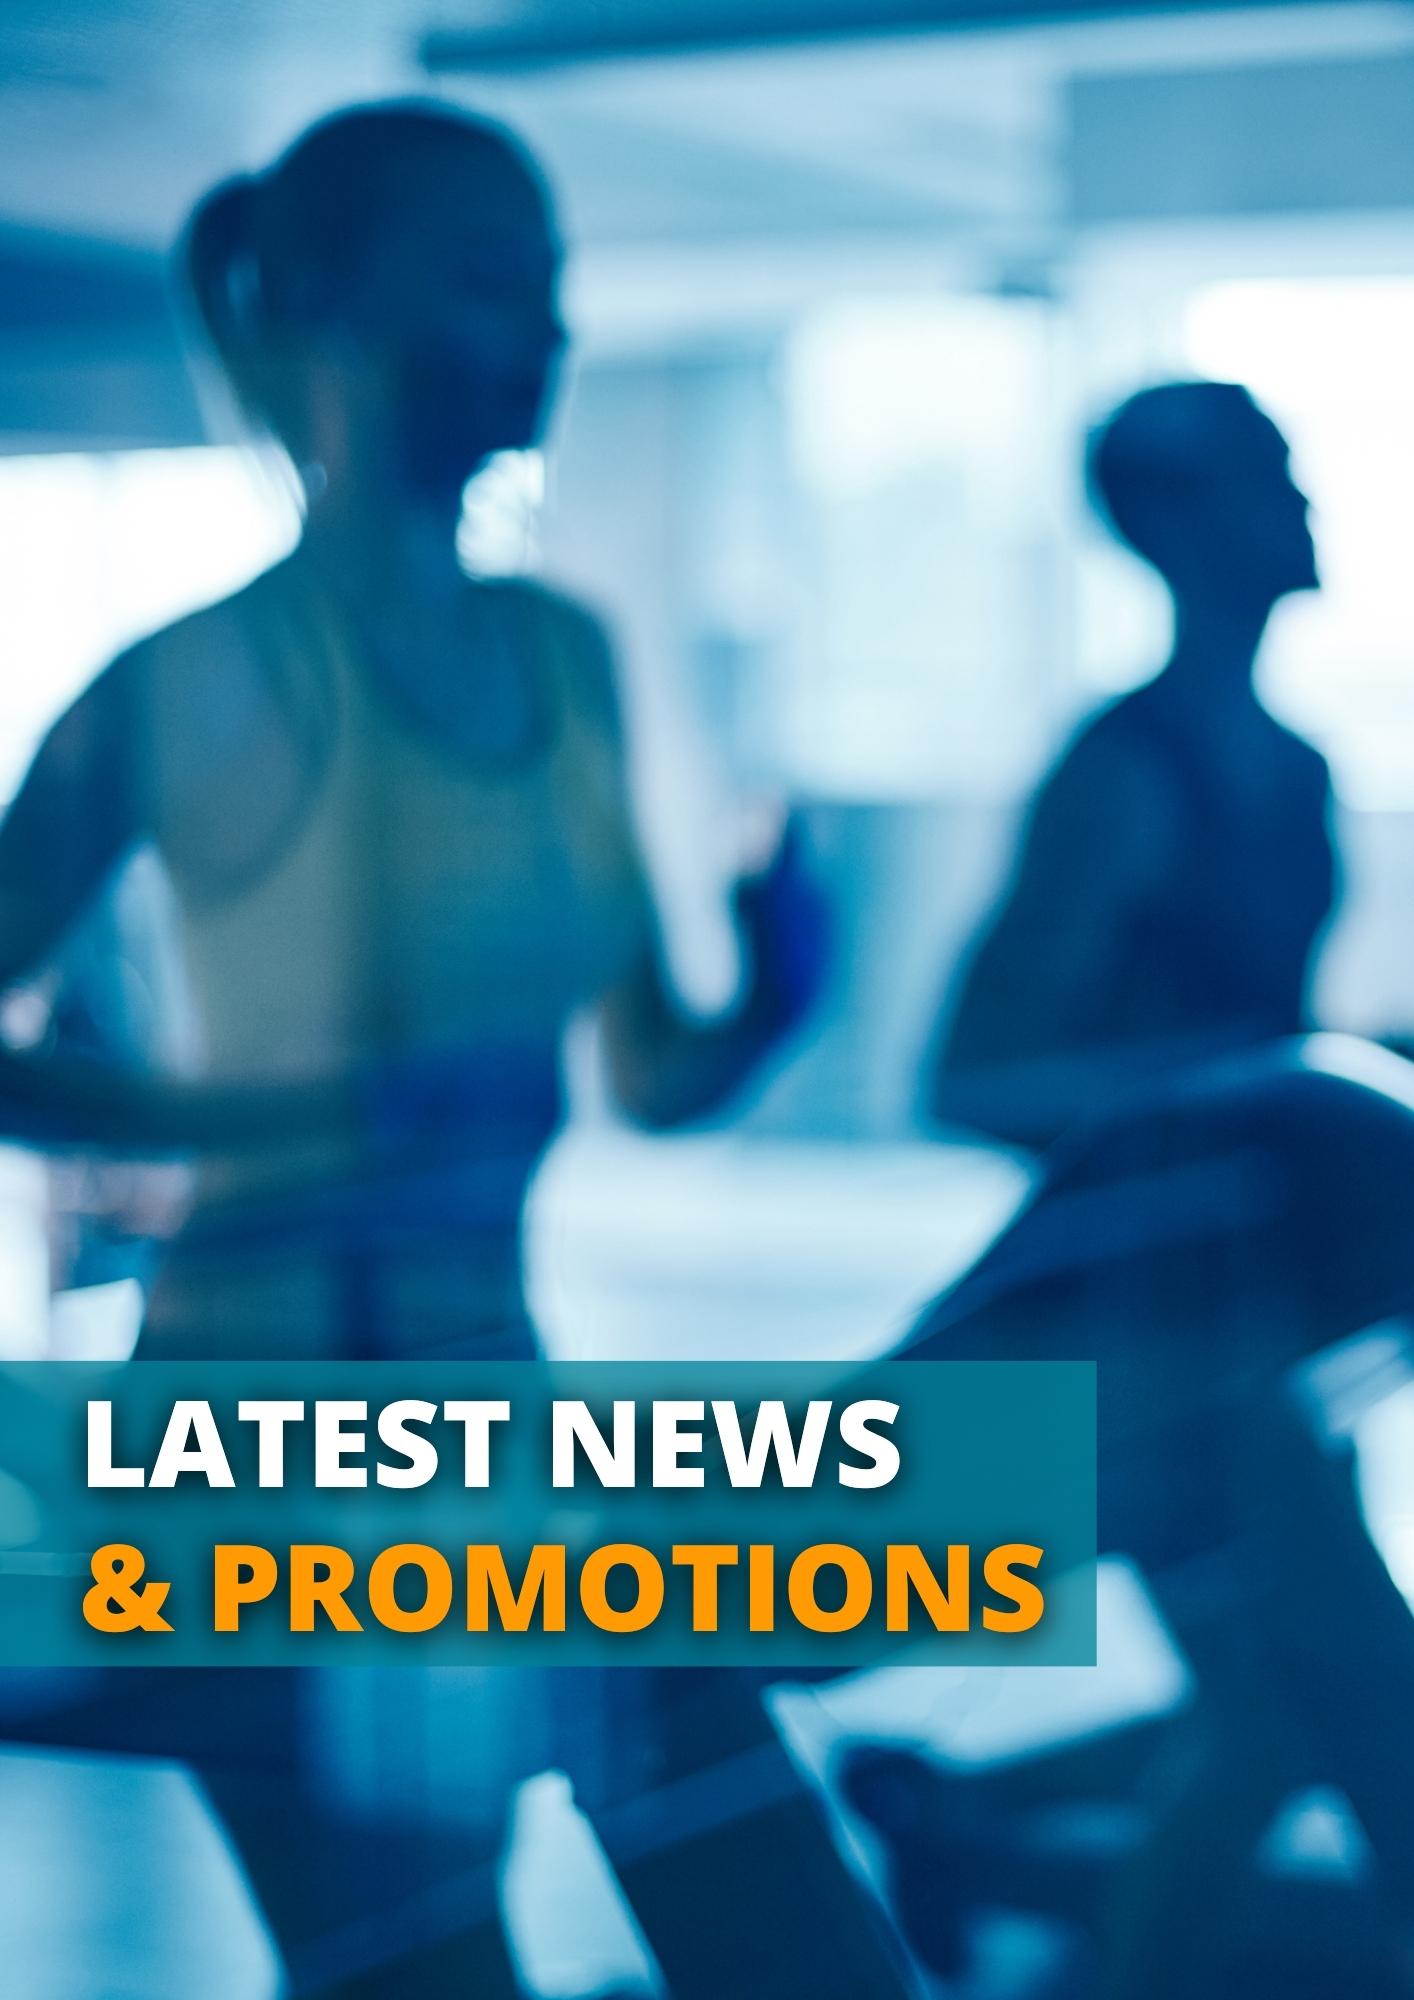 North Warwickshire leisure news and promotions